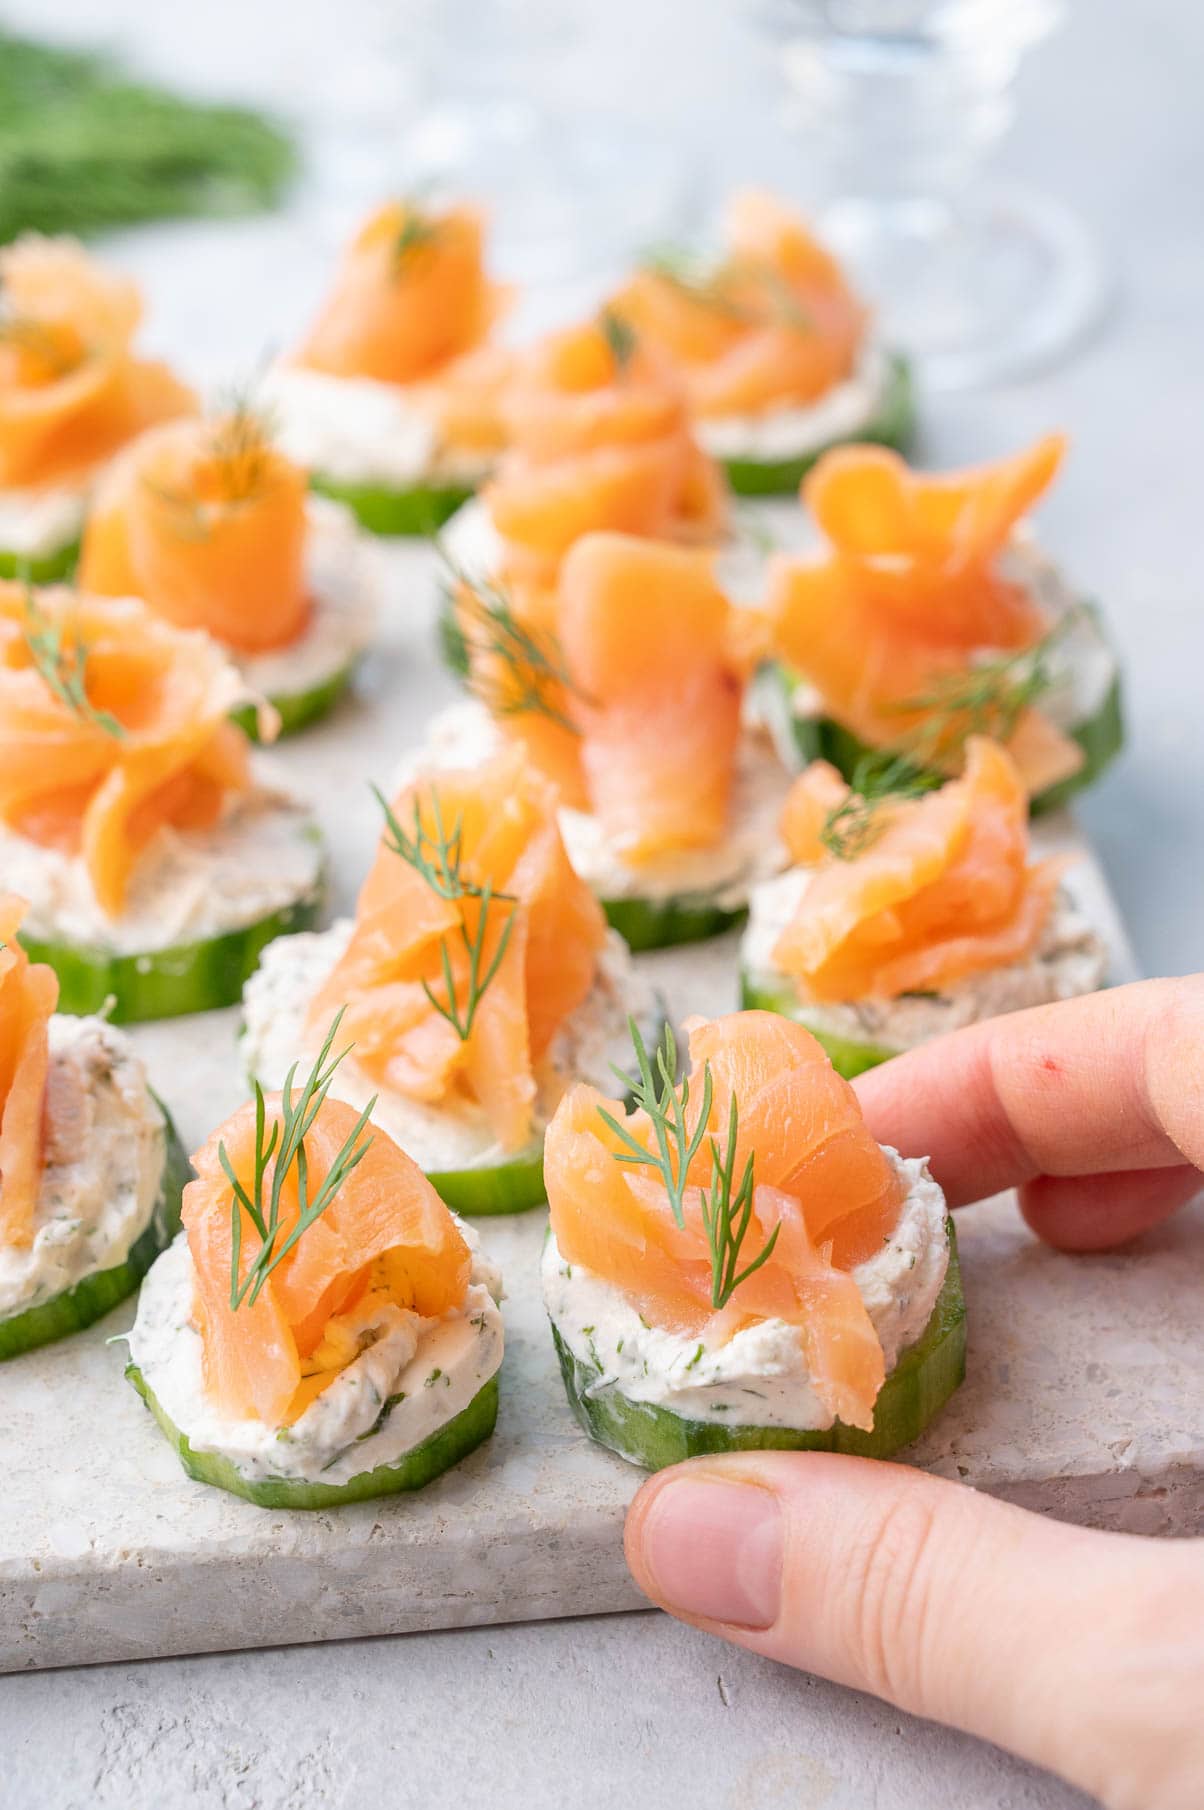 Cream cheese, Dell and Salmon horderves - Picture of Plantation